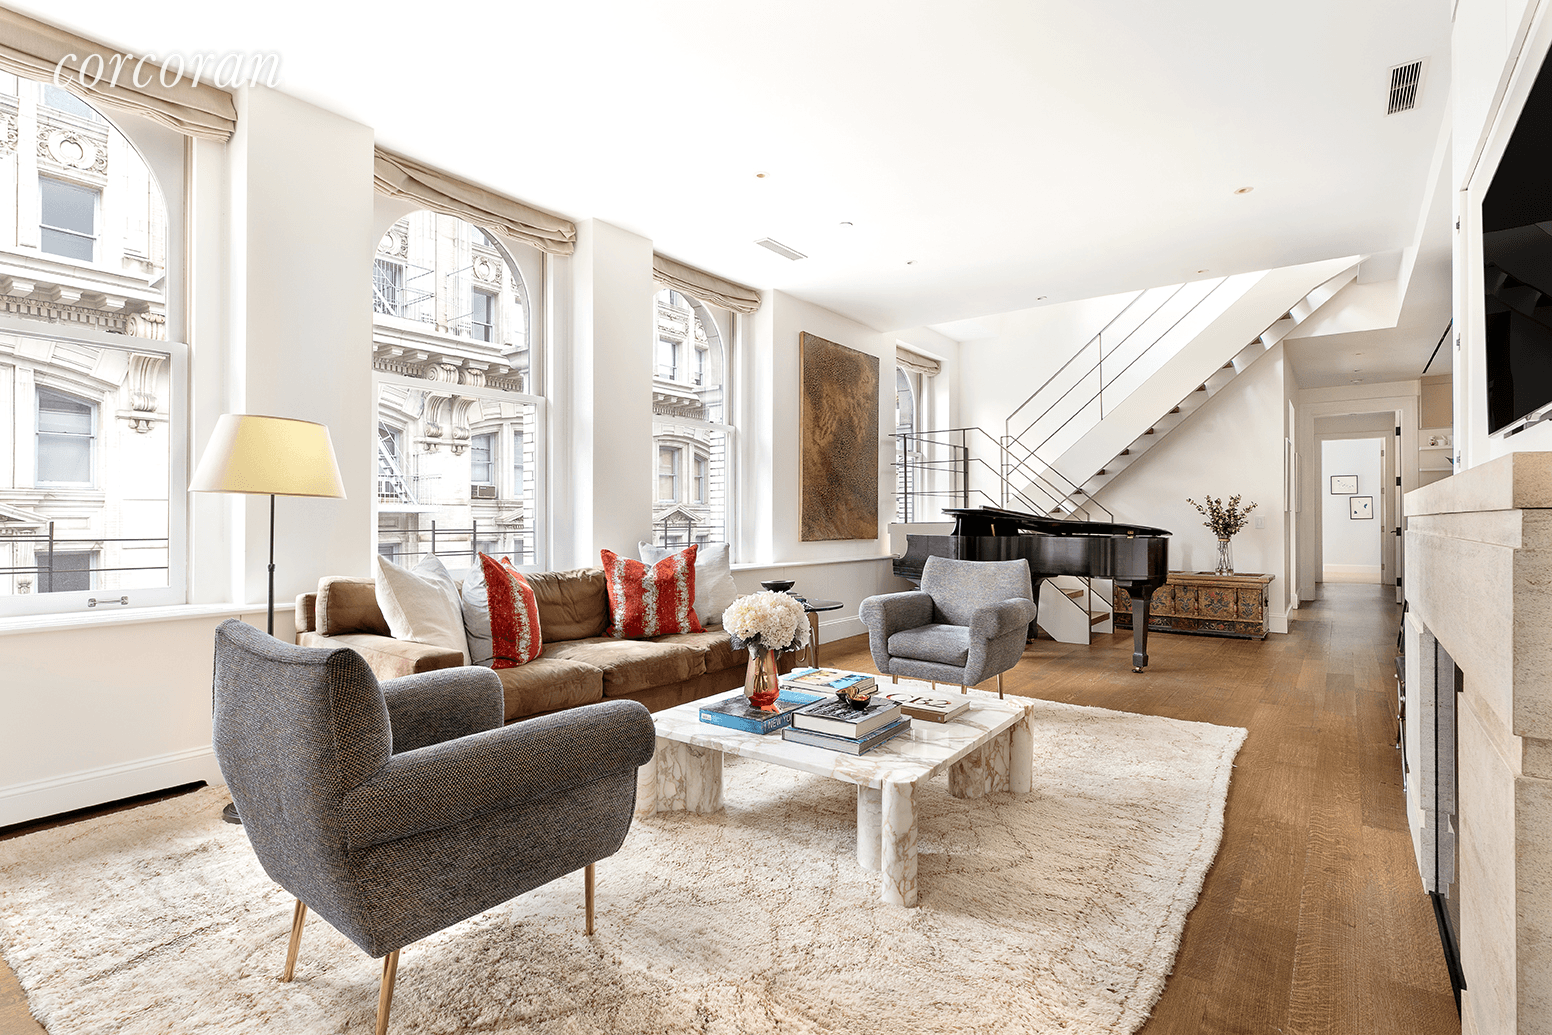 An oasis in the heart of Manhattan, this contemporary renovated 4 bedroom penthouse at 142 Fifth Avenue offers refined living, lavish layouts, and elegant inclusions including its own wonderfully landscaped ...